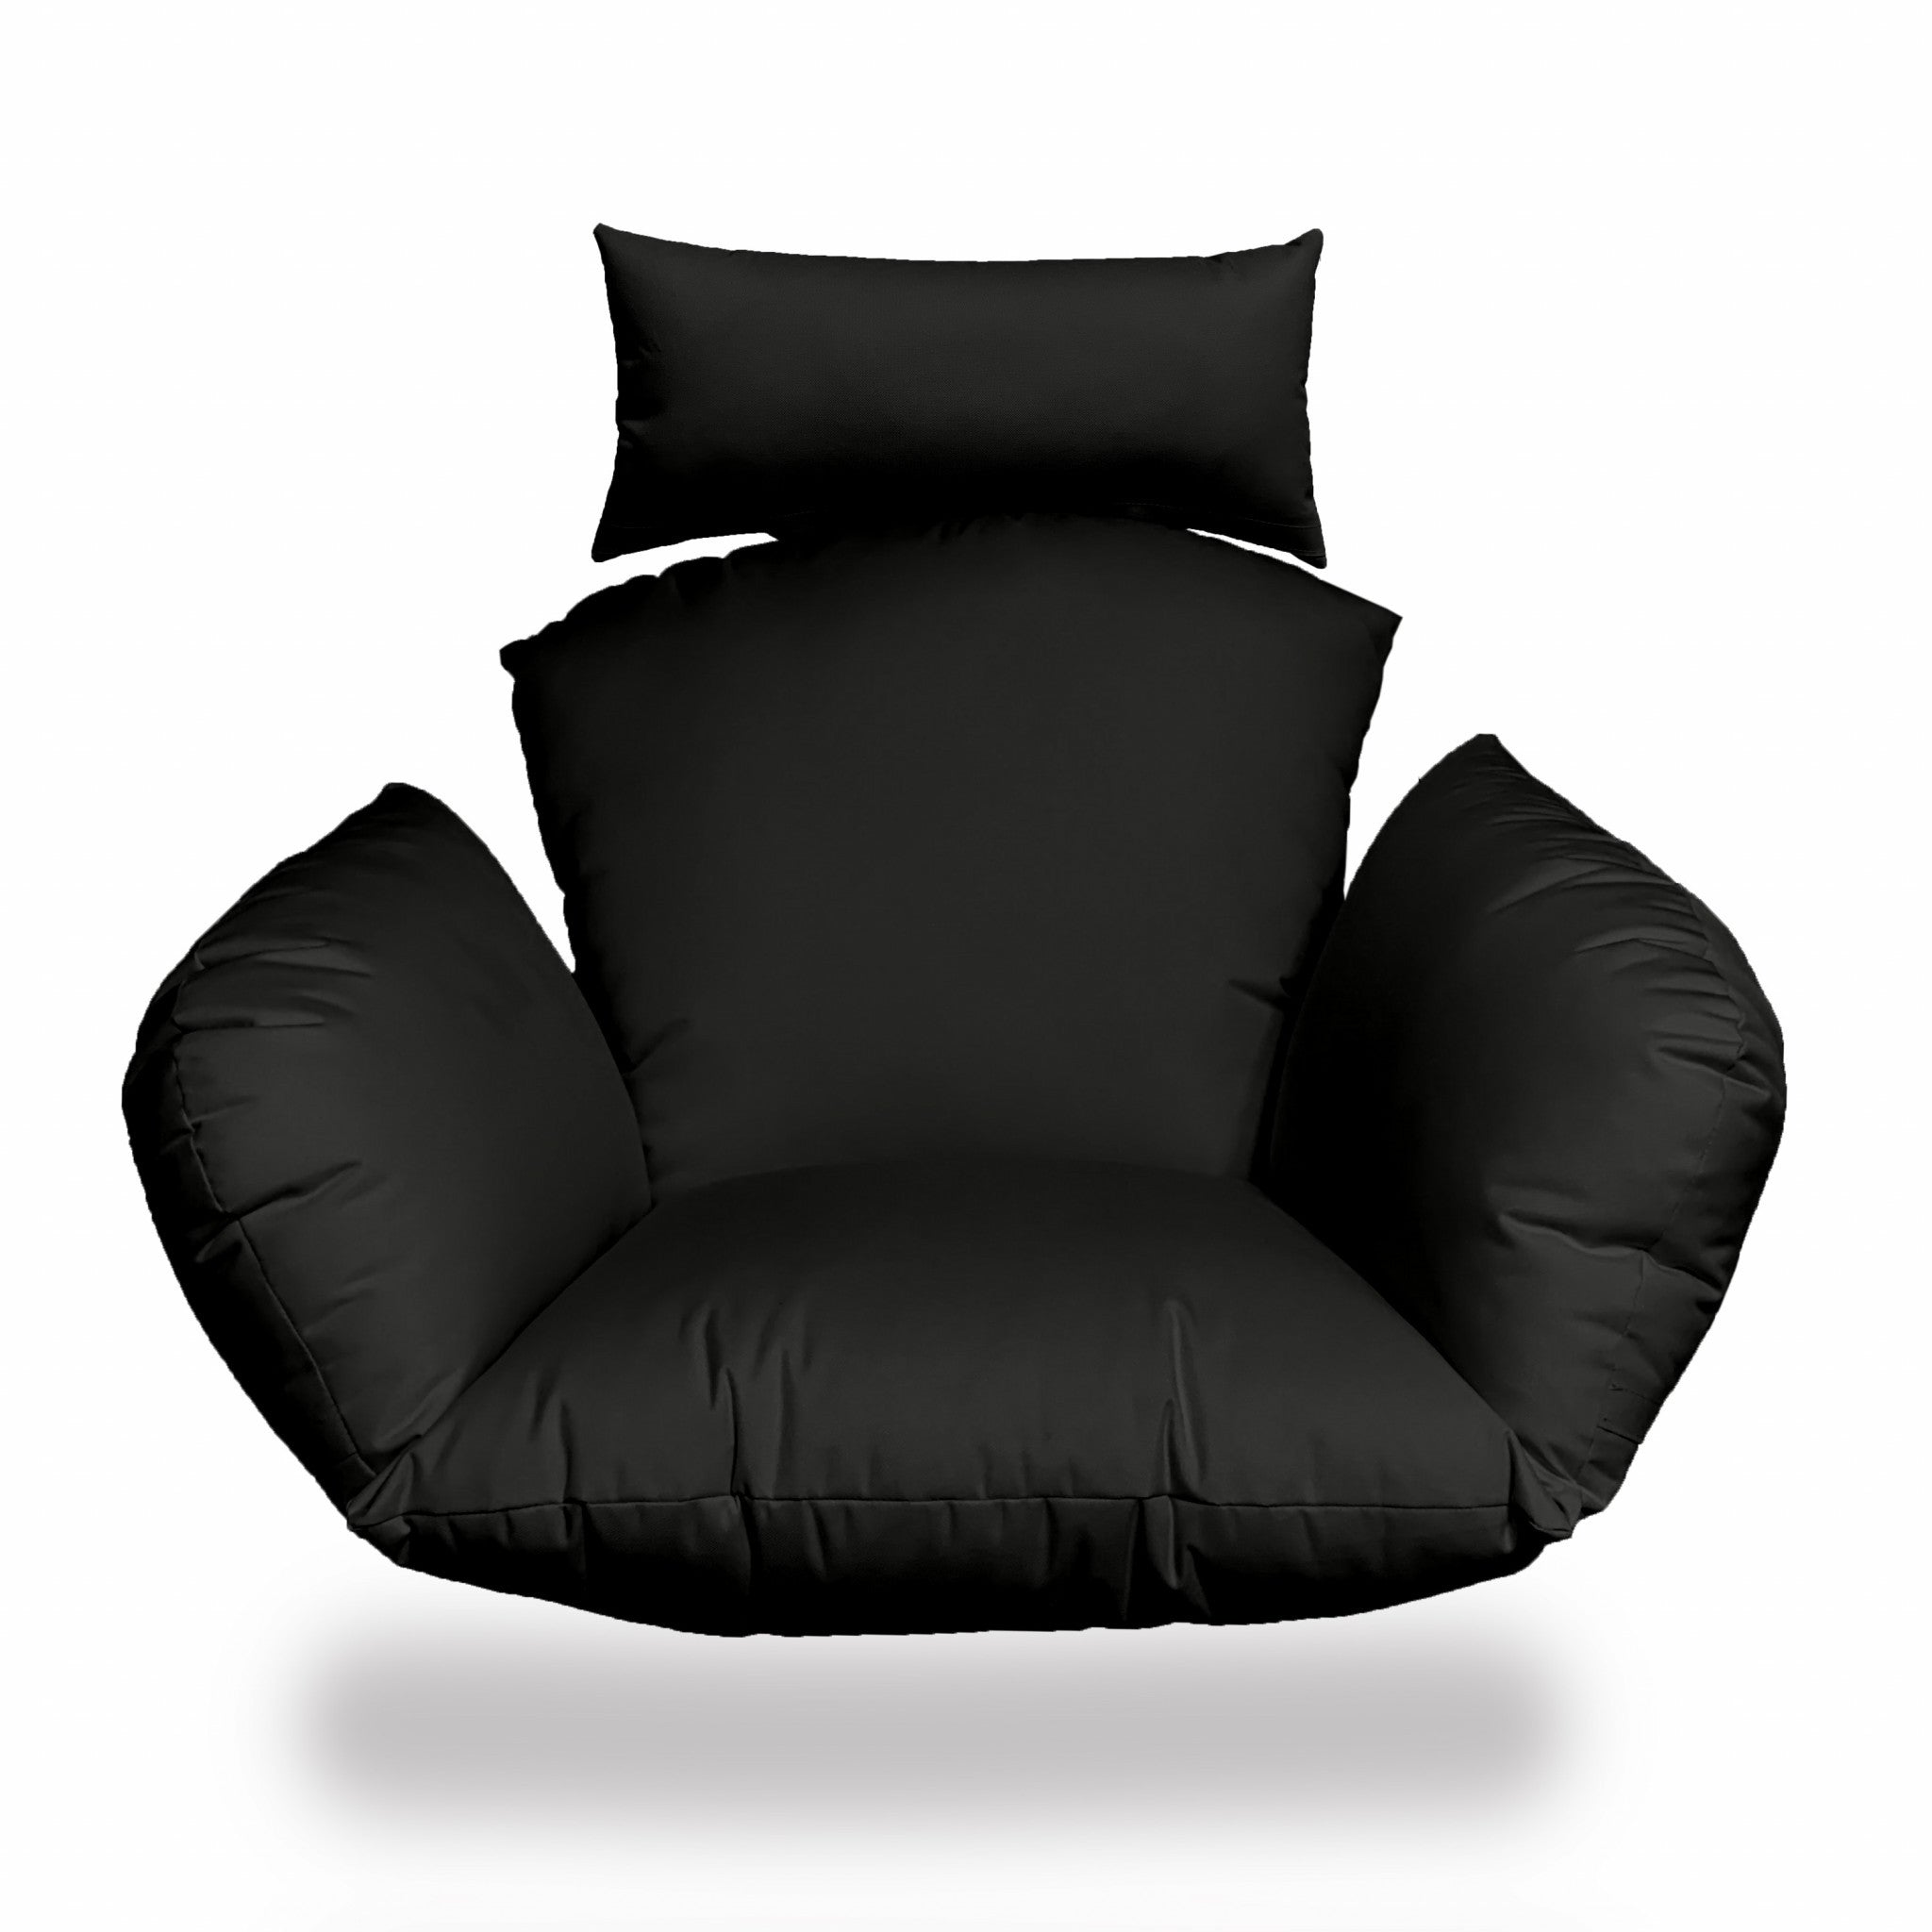 Primo Black Indoor Outdoor Replacement Cushion for Egg Chair